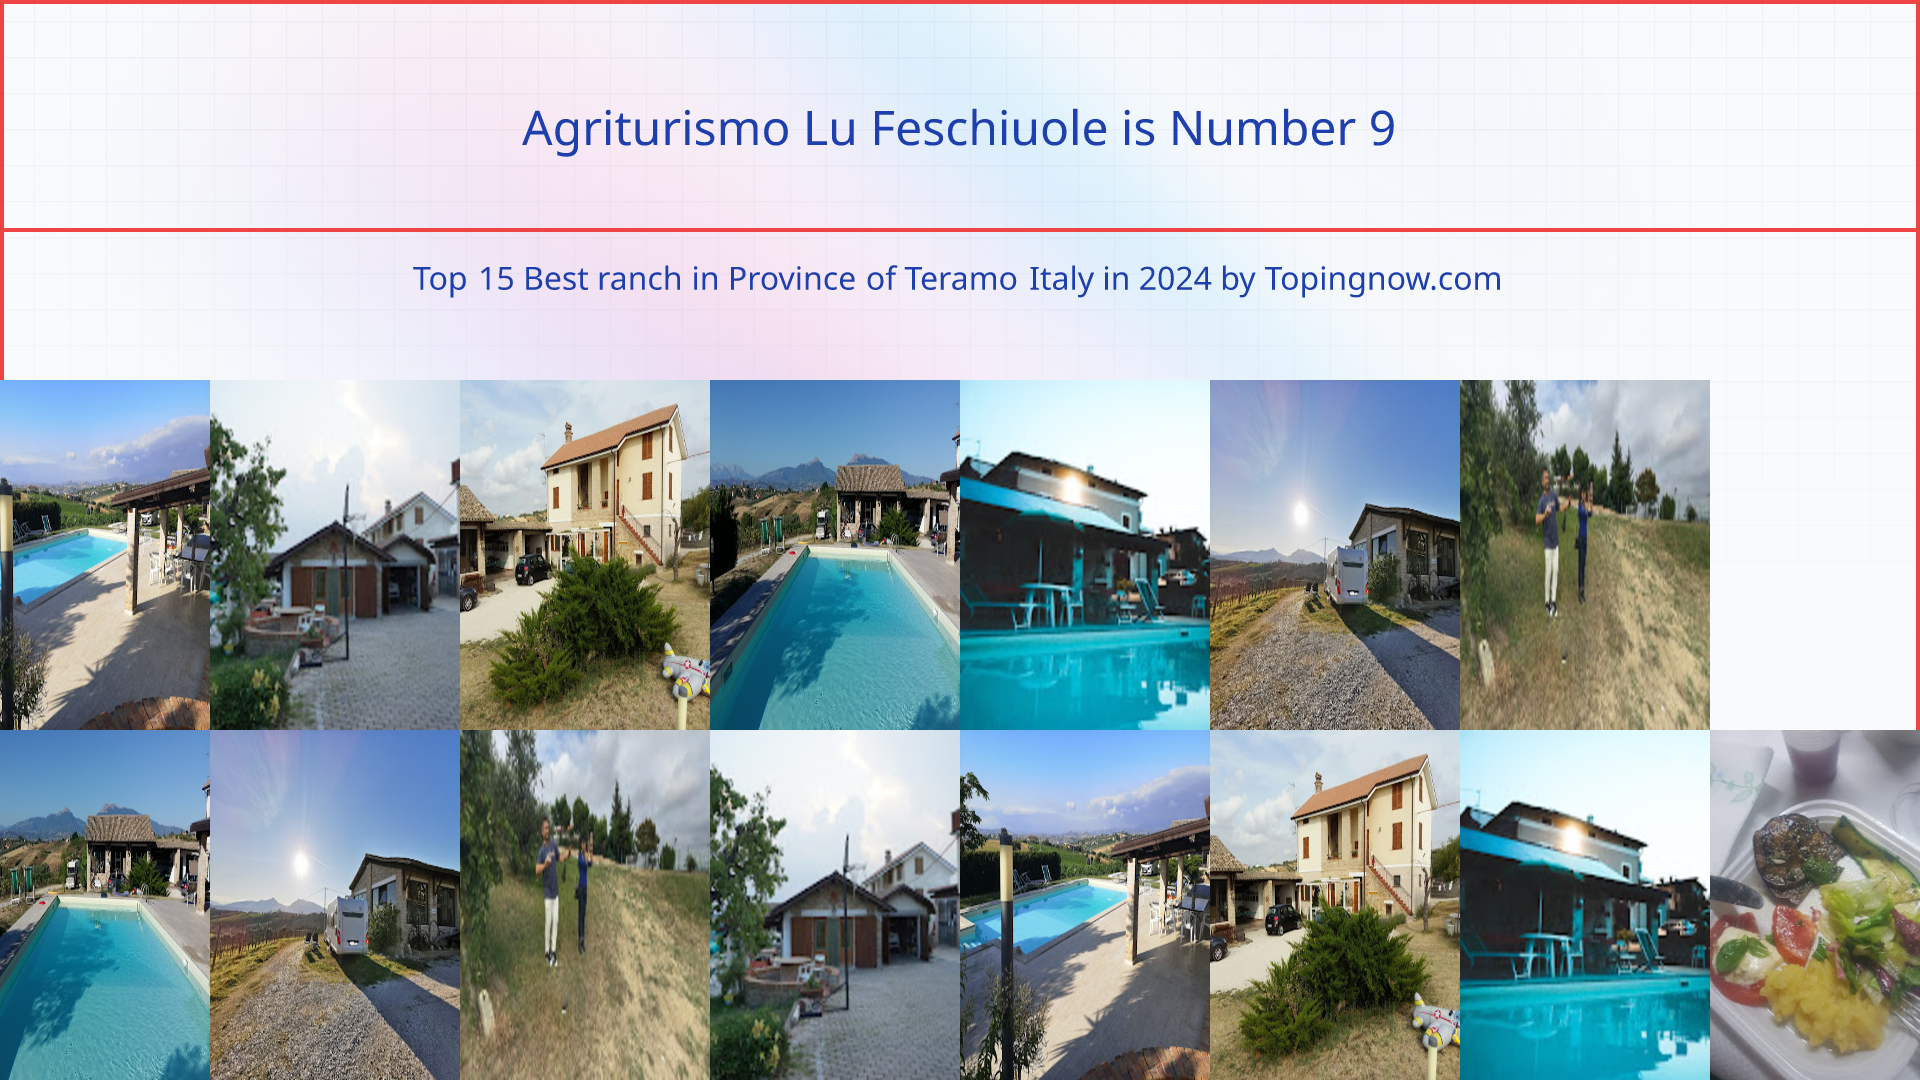 Agriturismo Lu Feschiuole: Top 15 Best ranch in Province of Teramo Italy in 2024